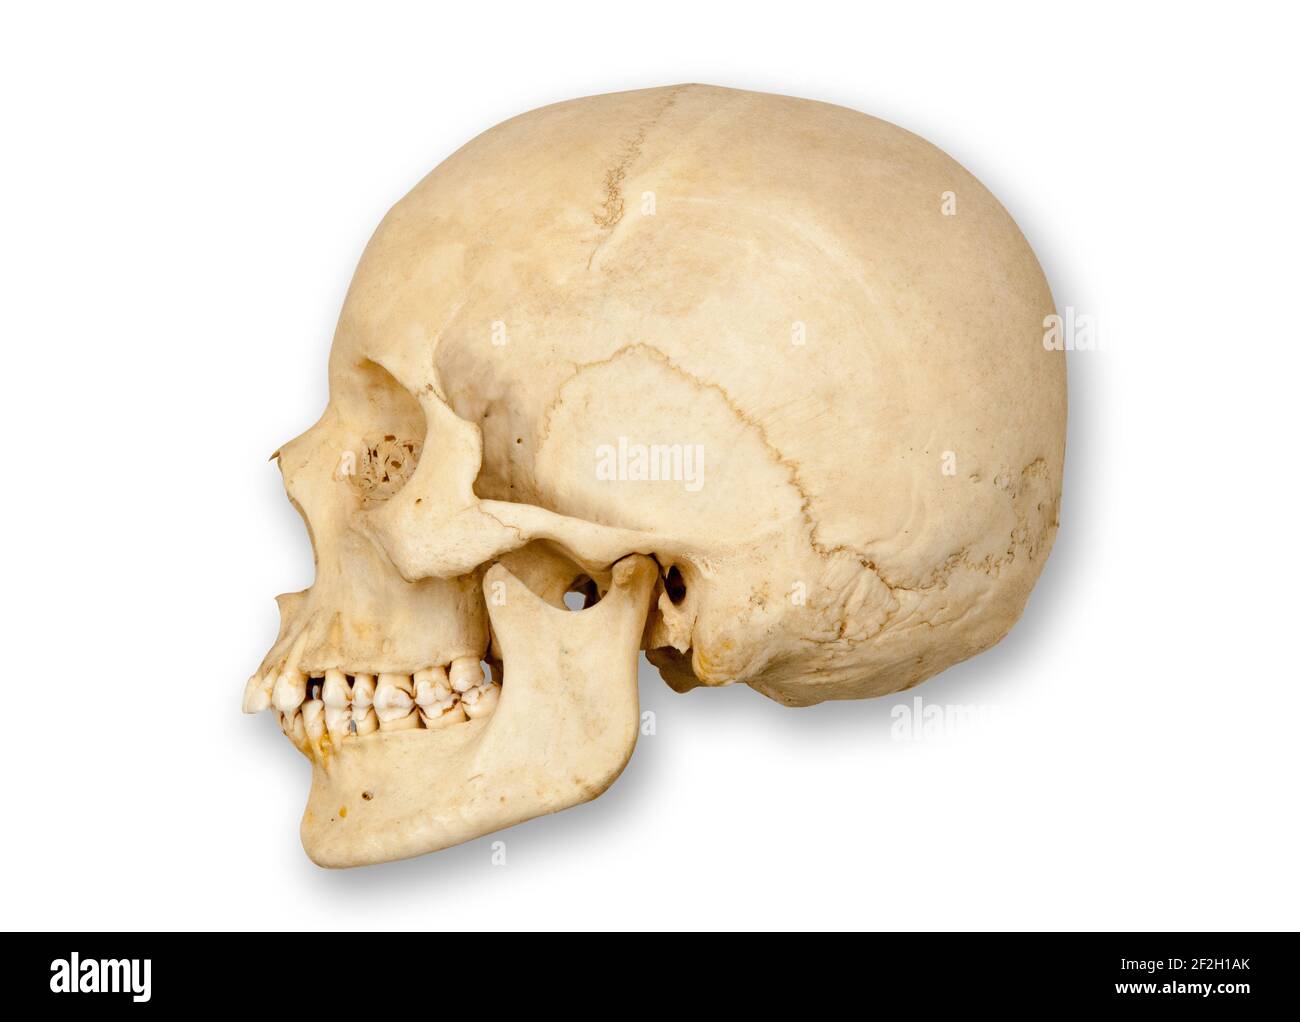 Sideways or profile view of left side of a human skull cut out with soft drop shadow on a white background. Stock Photo